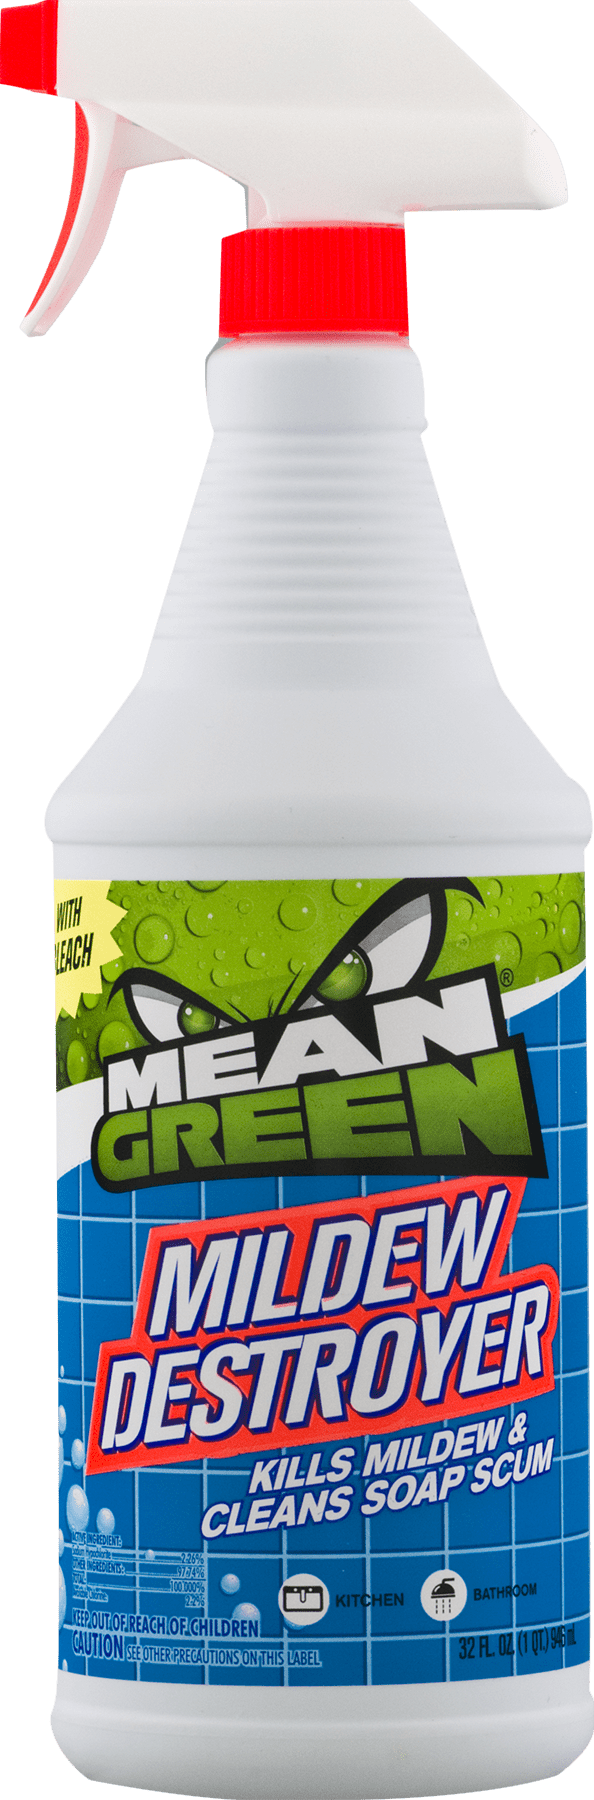 Buy Mean Green 73008 Foaming Bathroom Cleaner with Bleach, 32 oz, Liquid,  Solvent-Like, Colorless Colorless